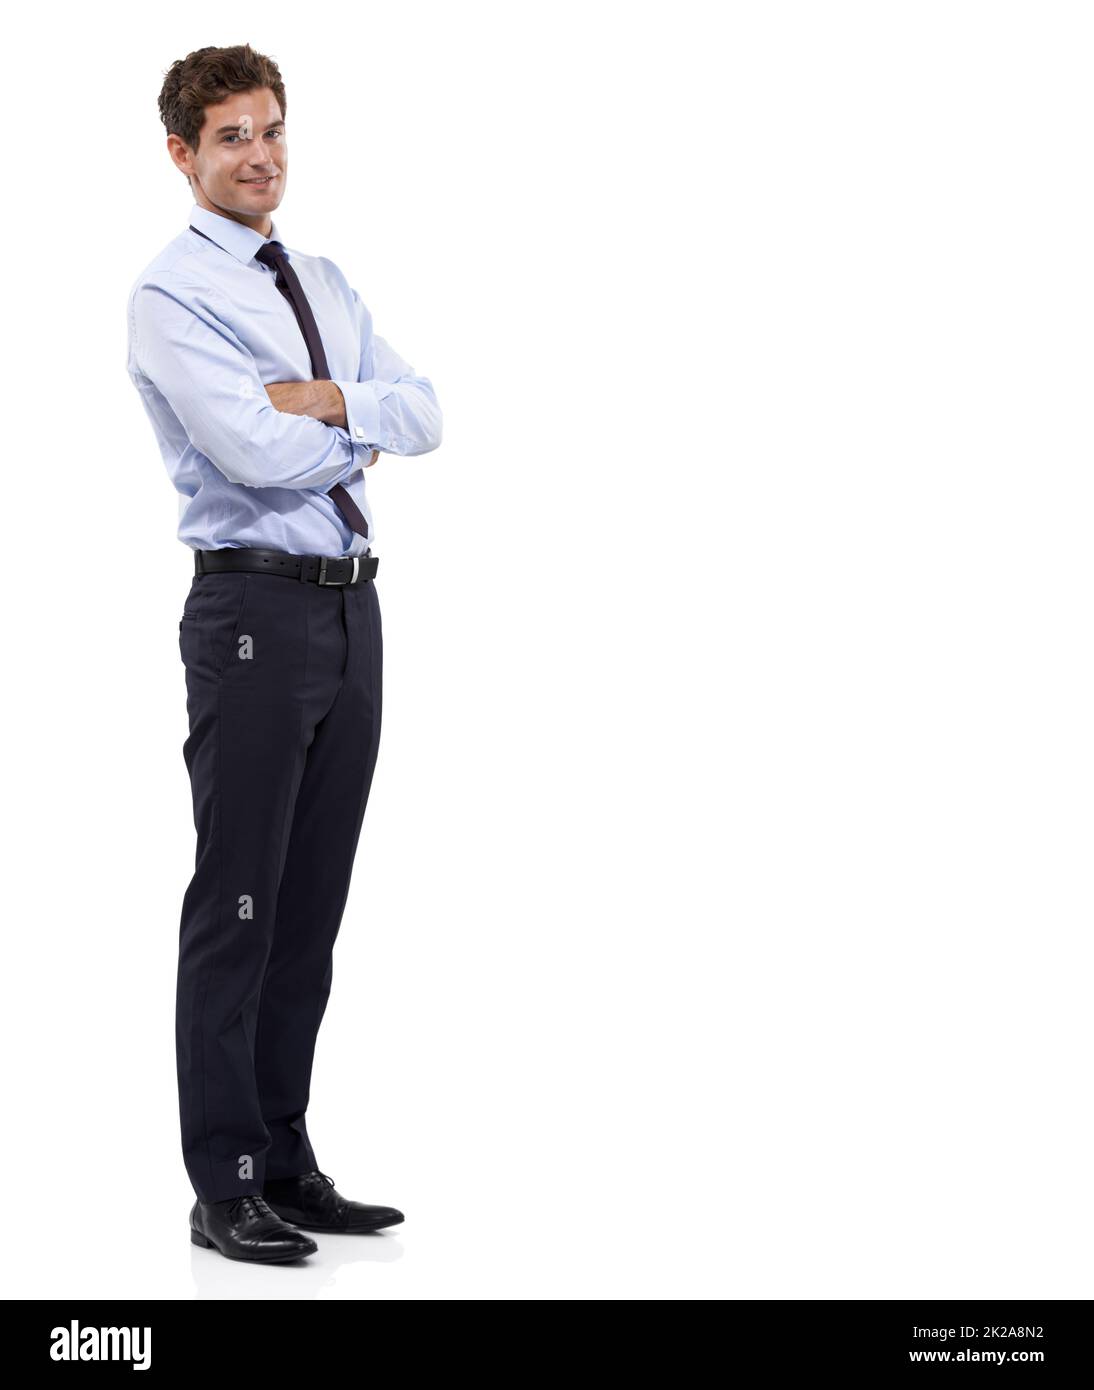 Confidently endorsing your copyspace. A handsome young businessman standing against a white background. Stock Photo